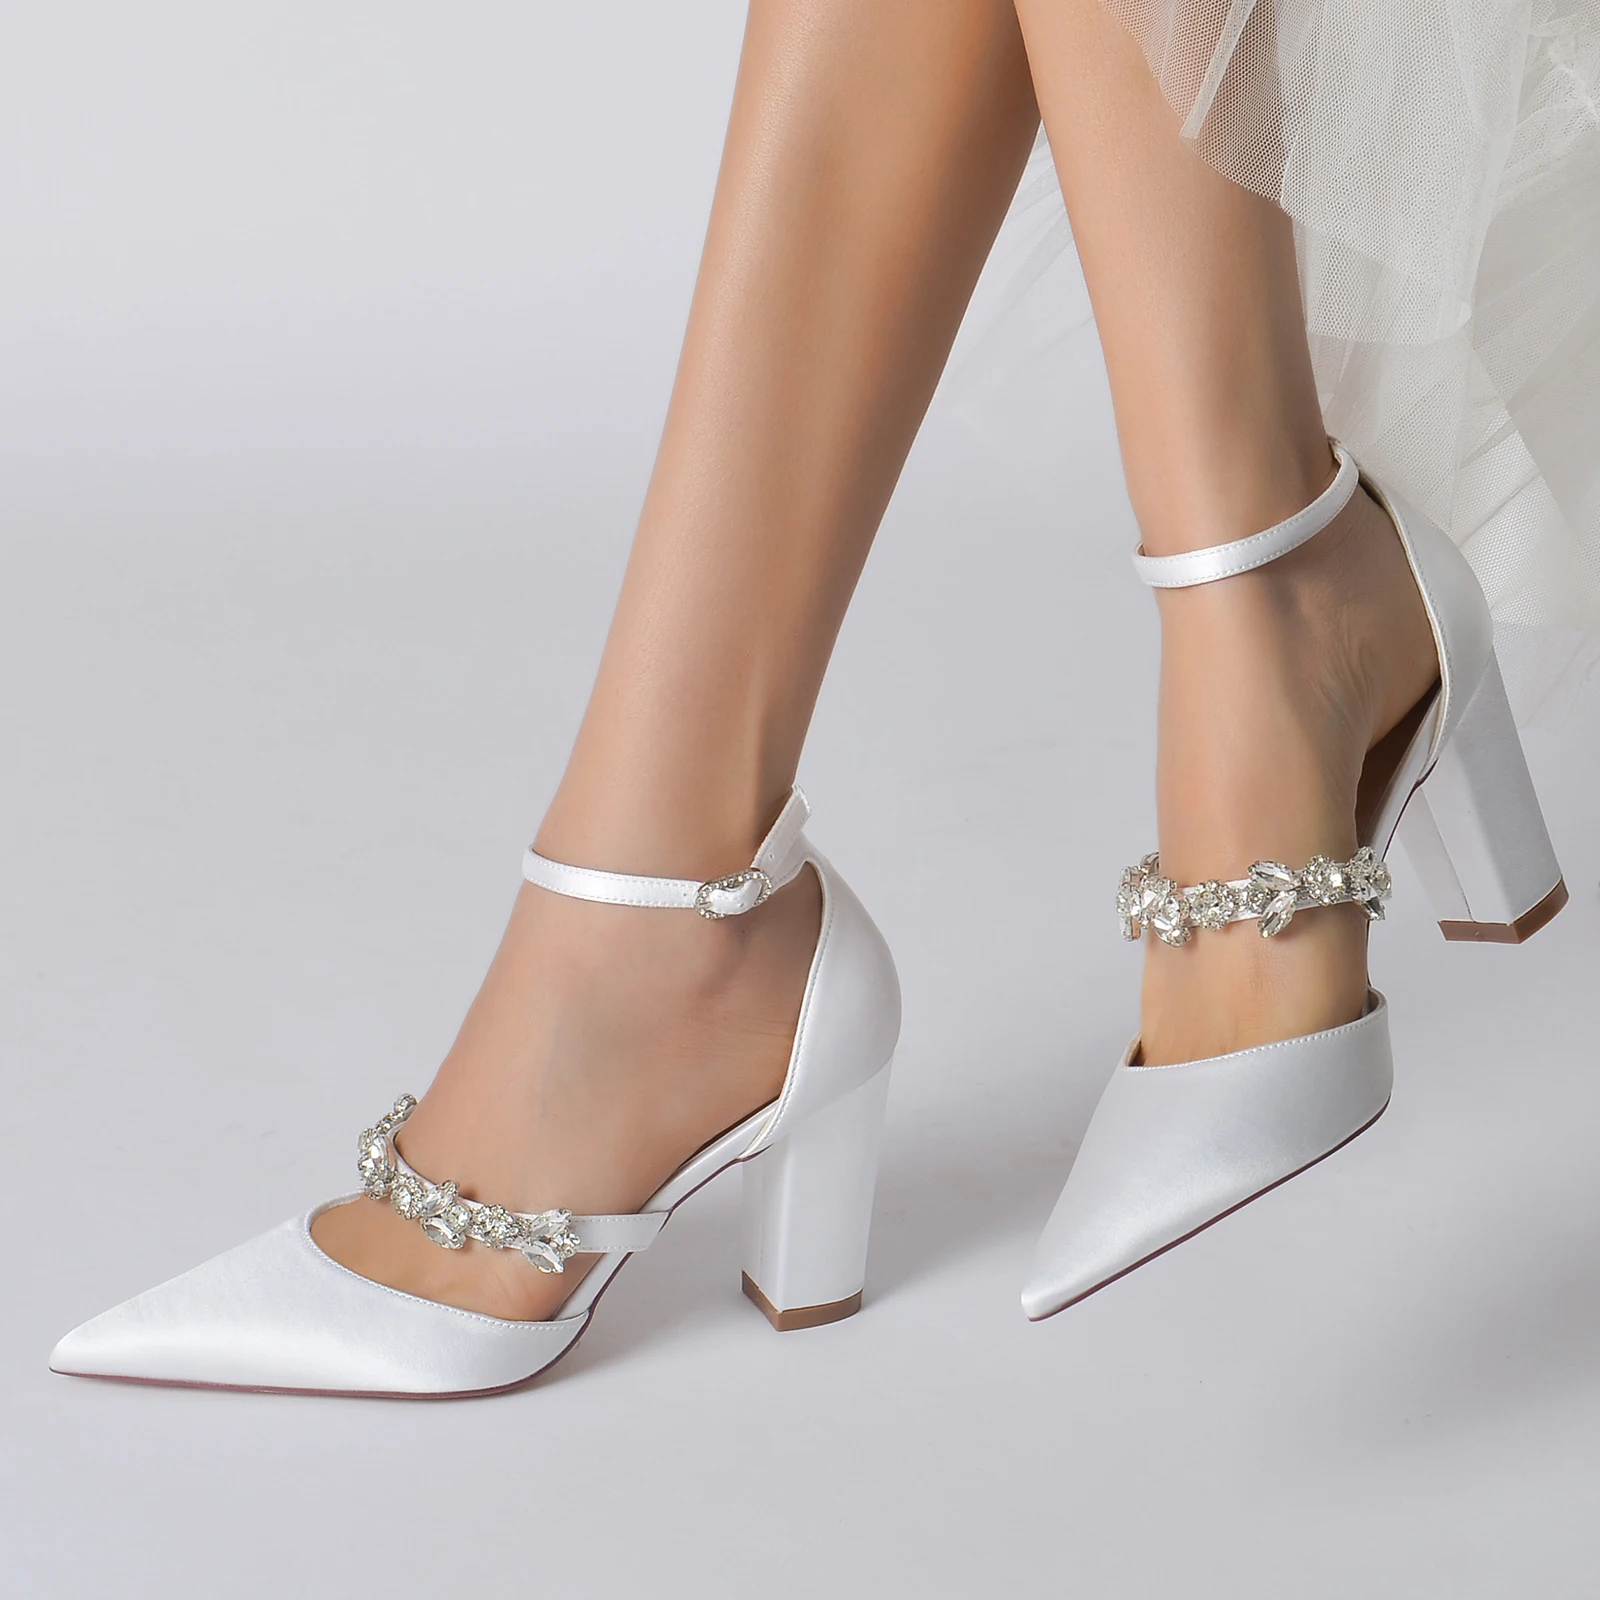 thick-heel-lady-satin-evening-dress-shoes-pointed-toe-with-crystal-strap-middle-ankle-strap-bridal-wedding-party-cocktail-lady